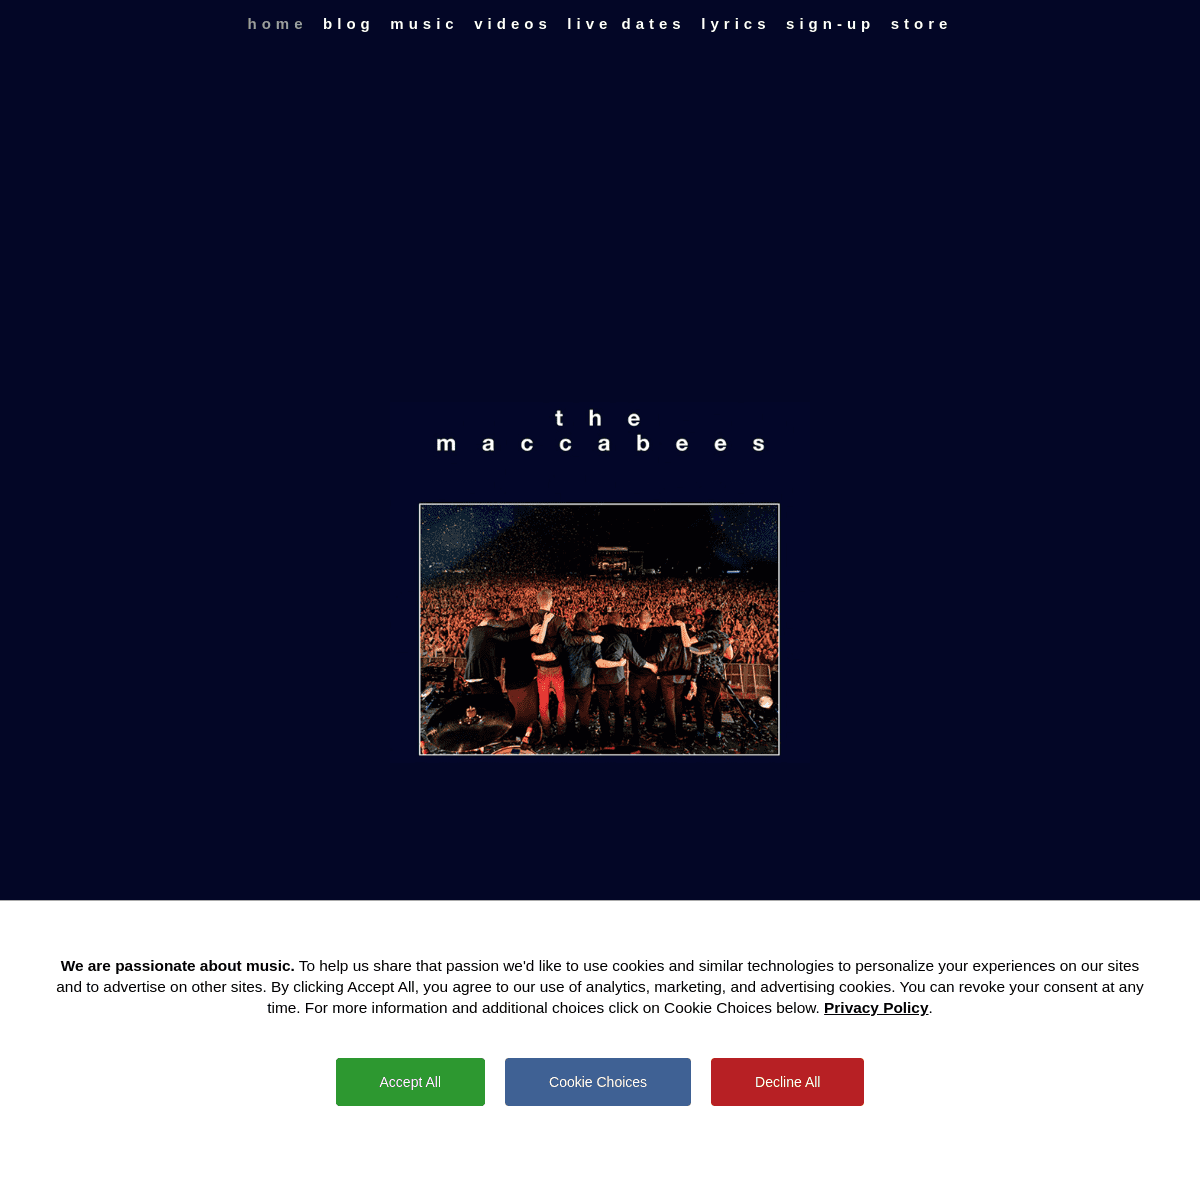 A complete backup of https://themaccabees.co.uk